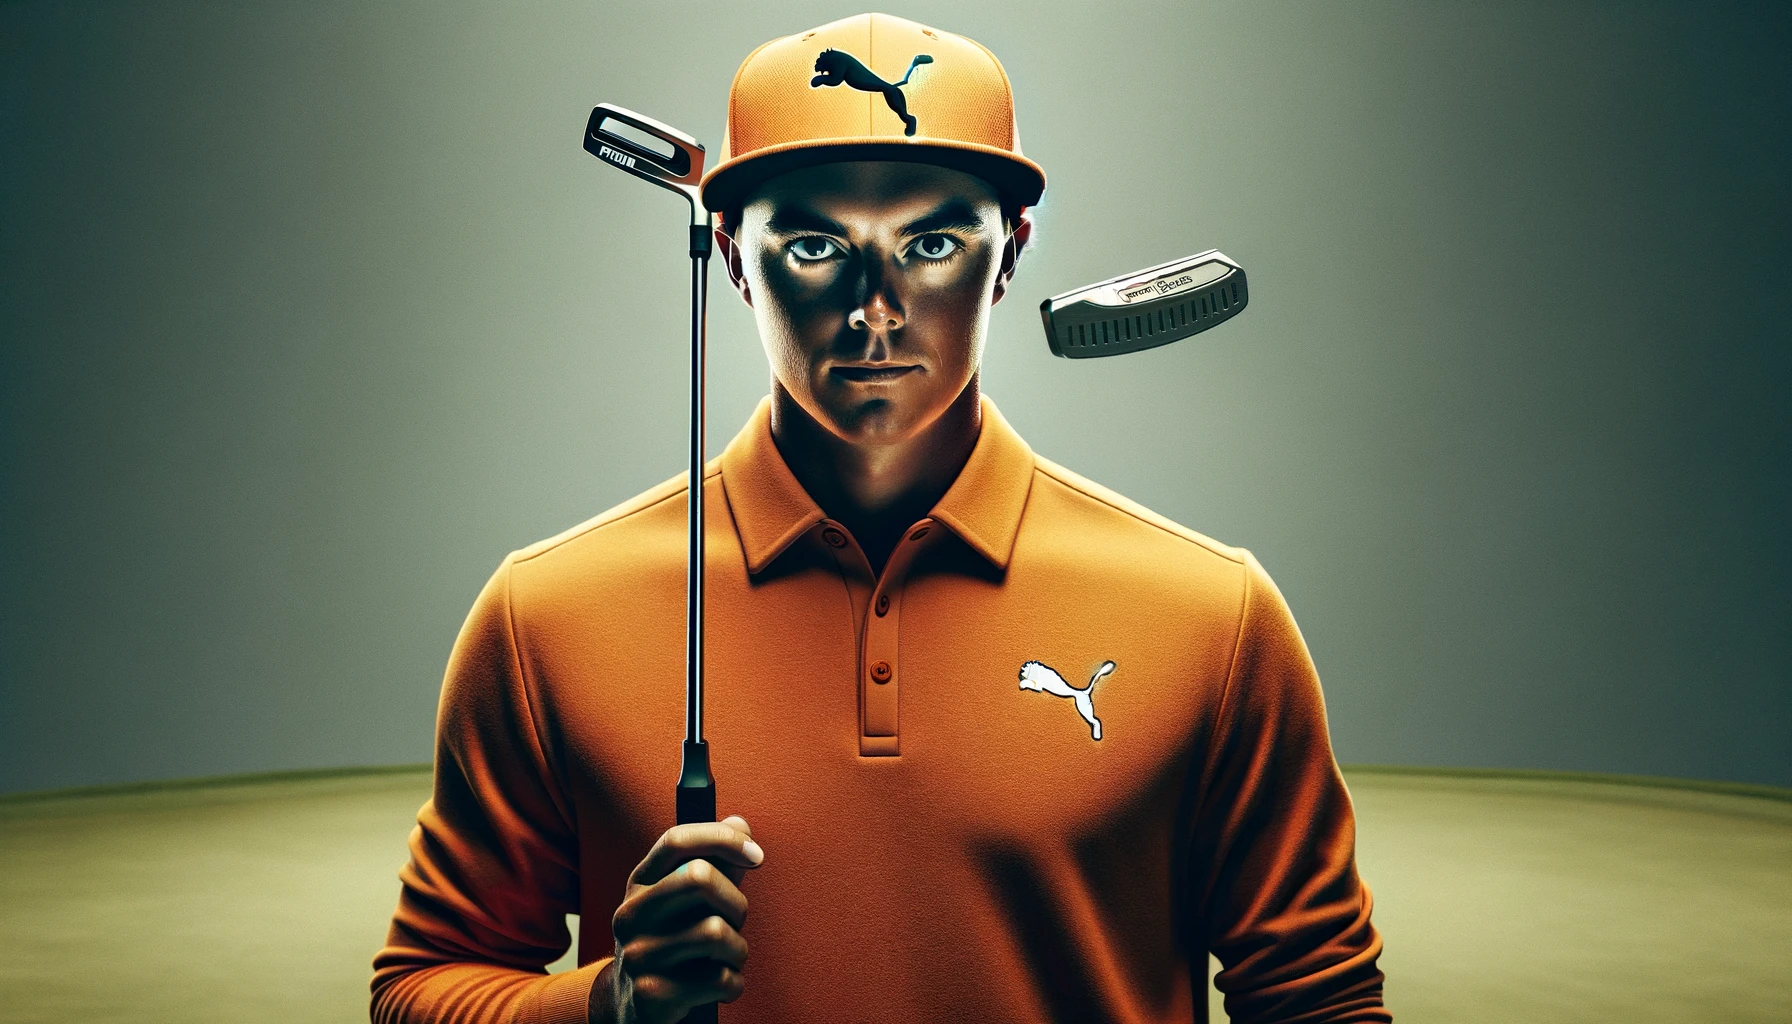 What Putter is Rickie Fowler Using?